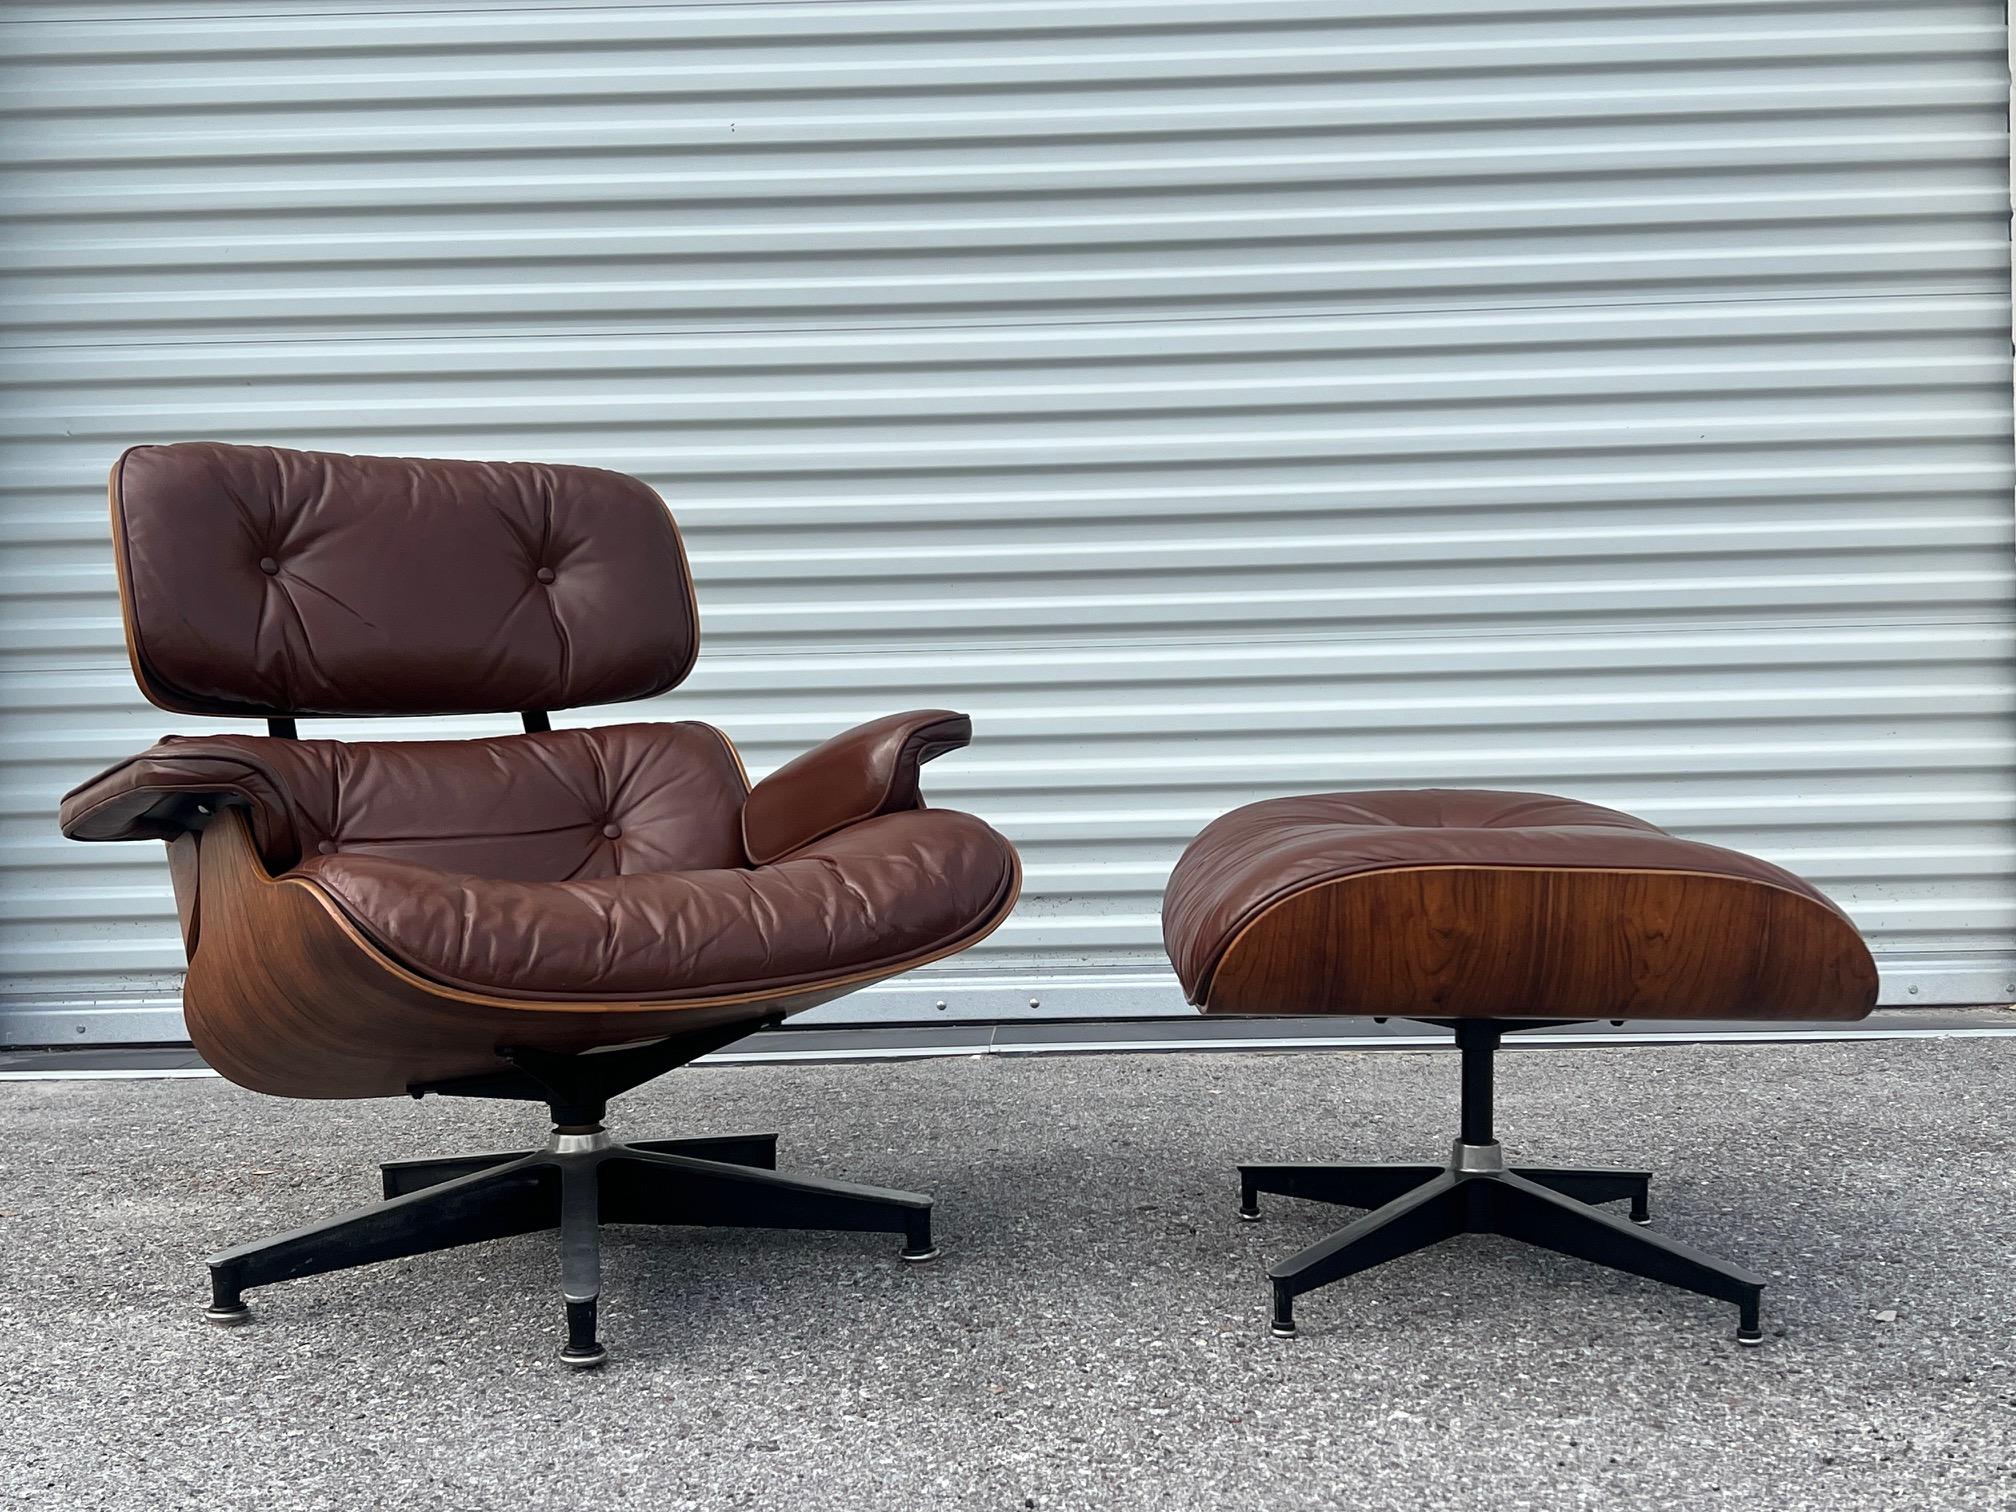 Beautiful Charles Eames, Herman Miller lounger chair and ottoman, 1970's. Original cognac brown leather and Brazilian rosewood with unusual grain patterns/flaming effect. The chair has a nicely worn feel with lovely patina. The brown leather has an